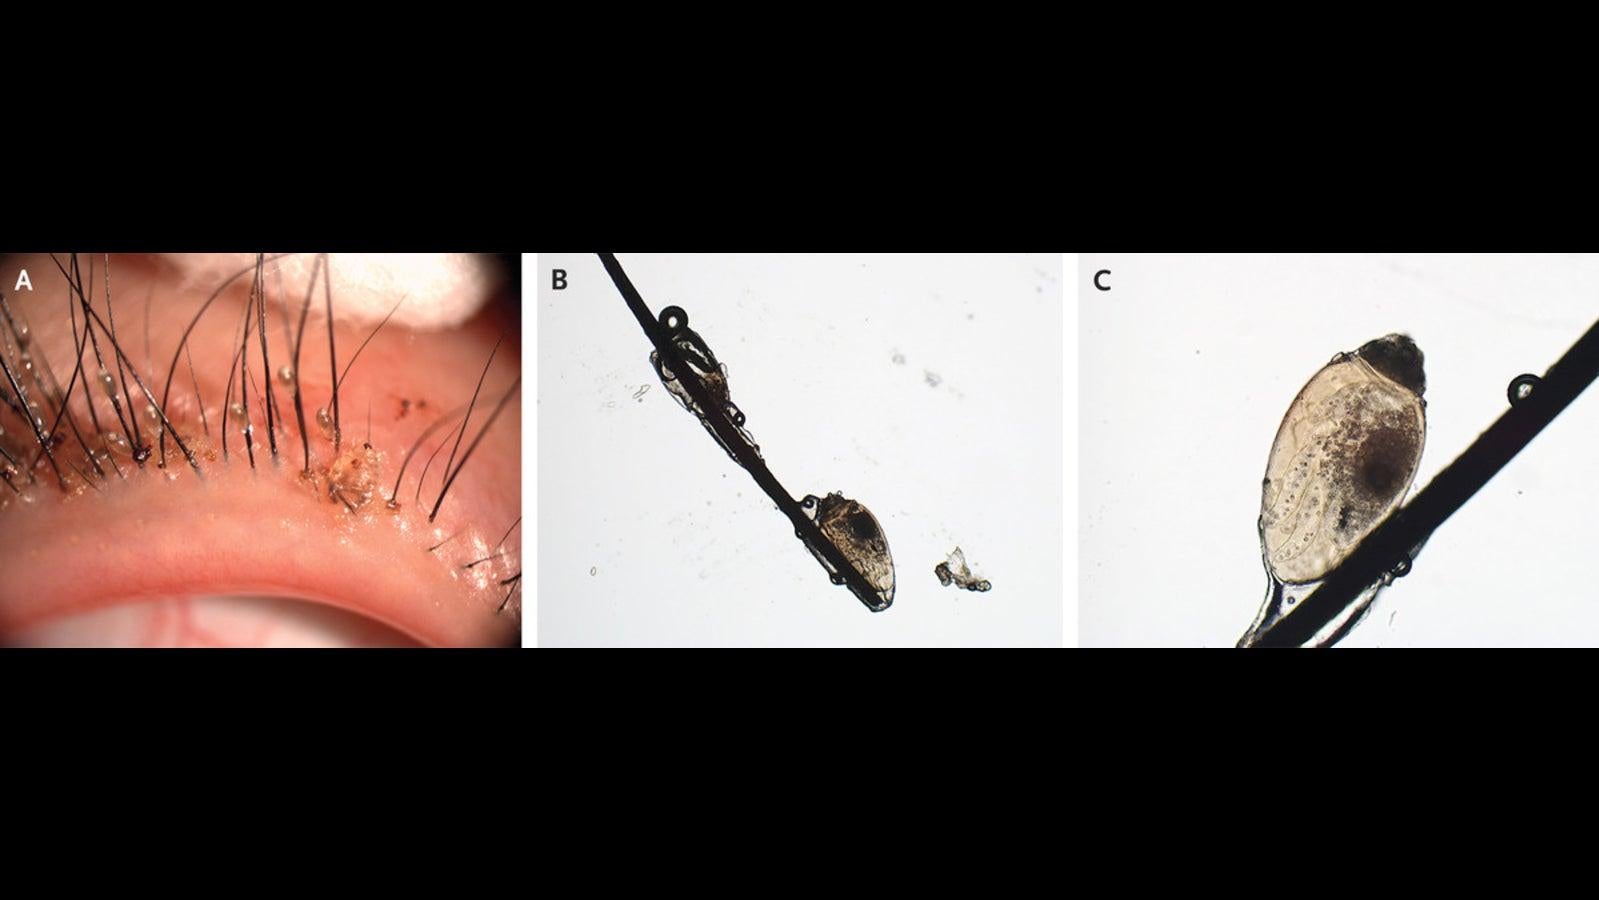 Images of the patient's lice captured via slit-lamp examination (A) and via a microscope (B and C) (Image: Xue Feng and Hong Qi/© The New England Journal of Medicine (2021))